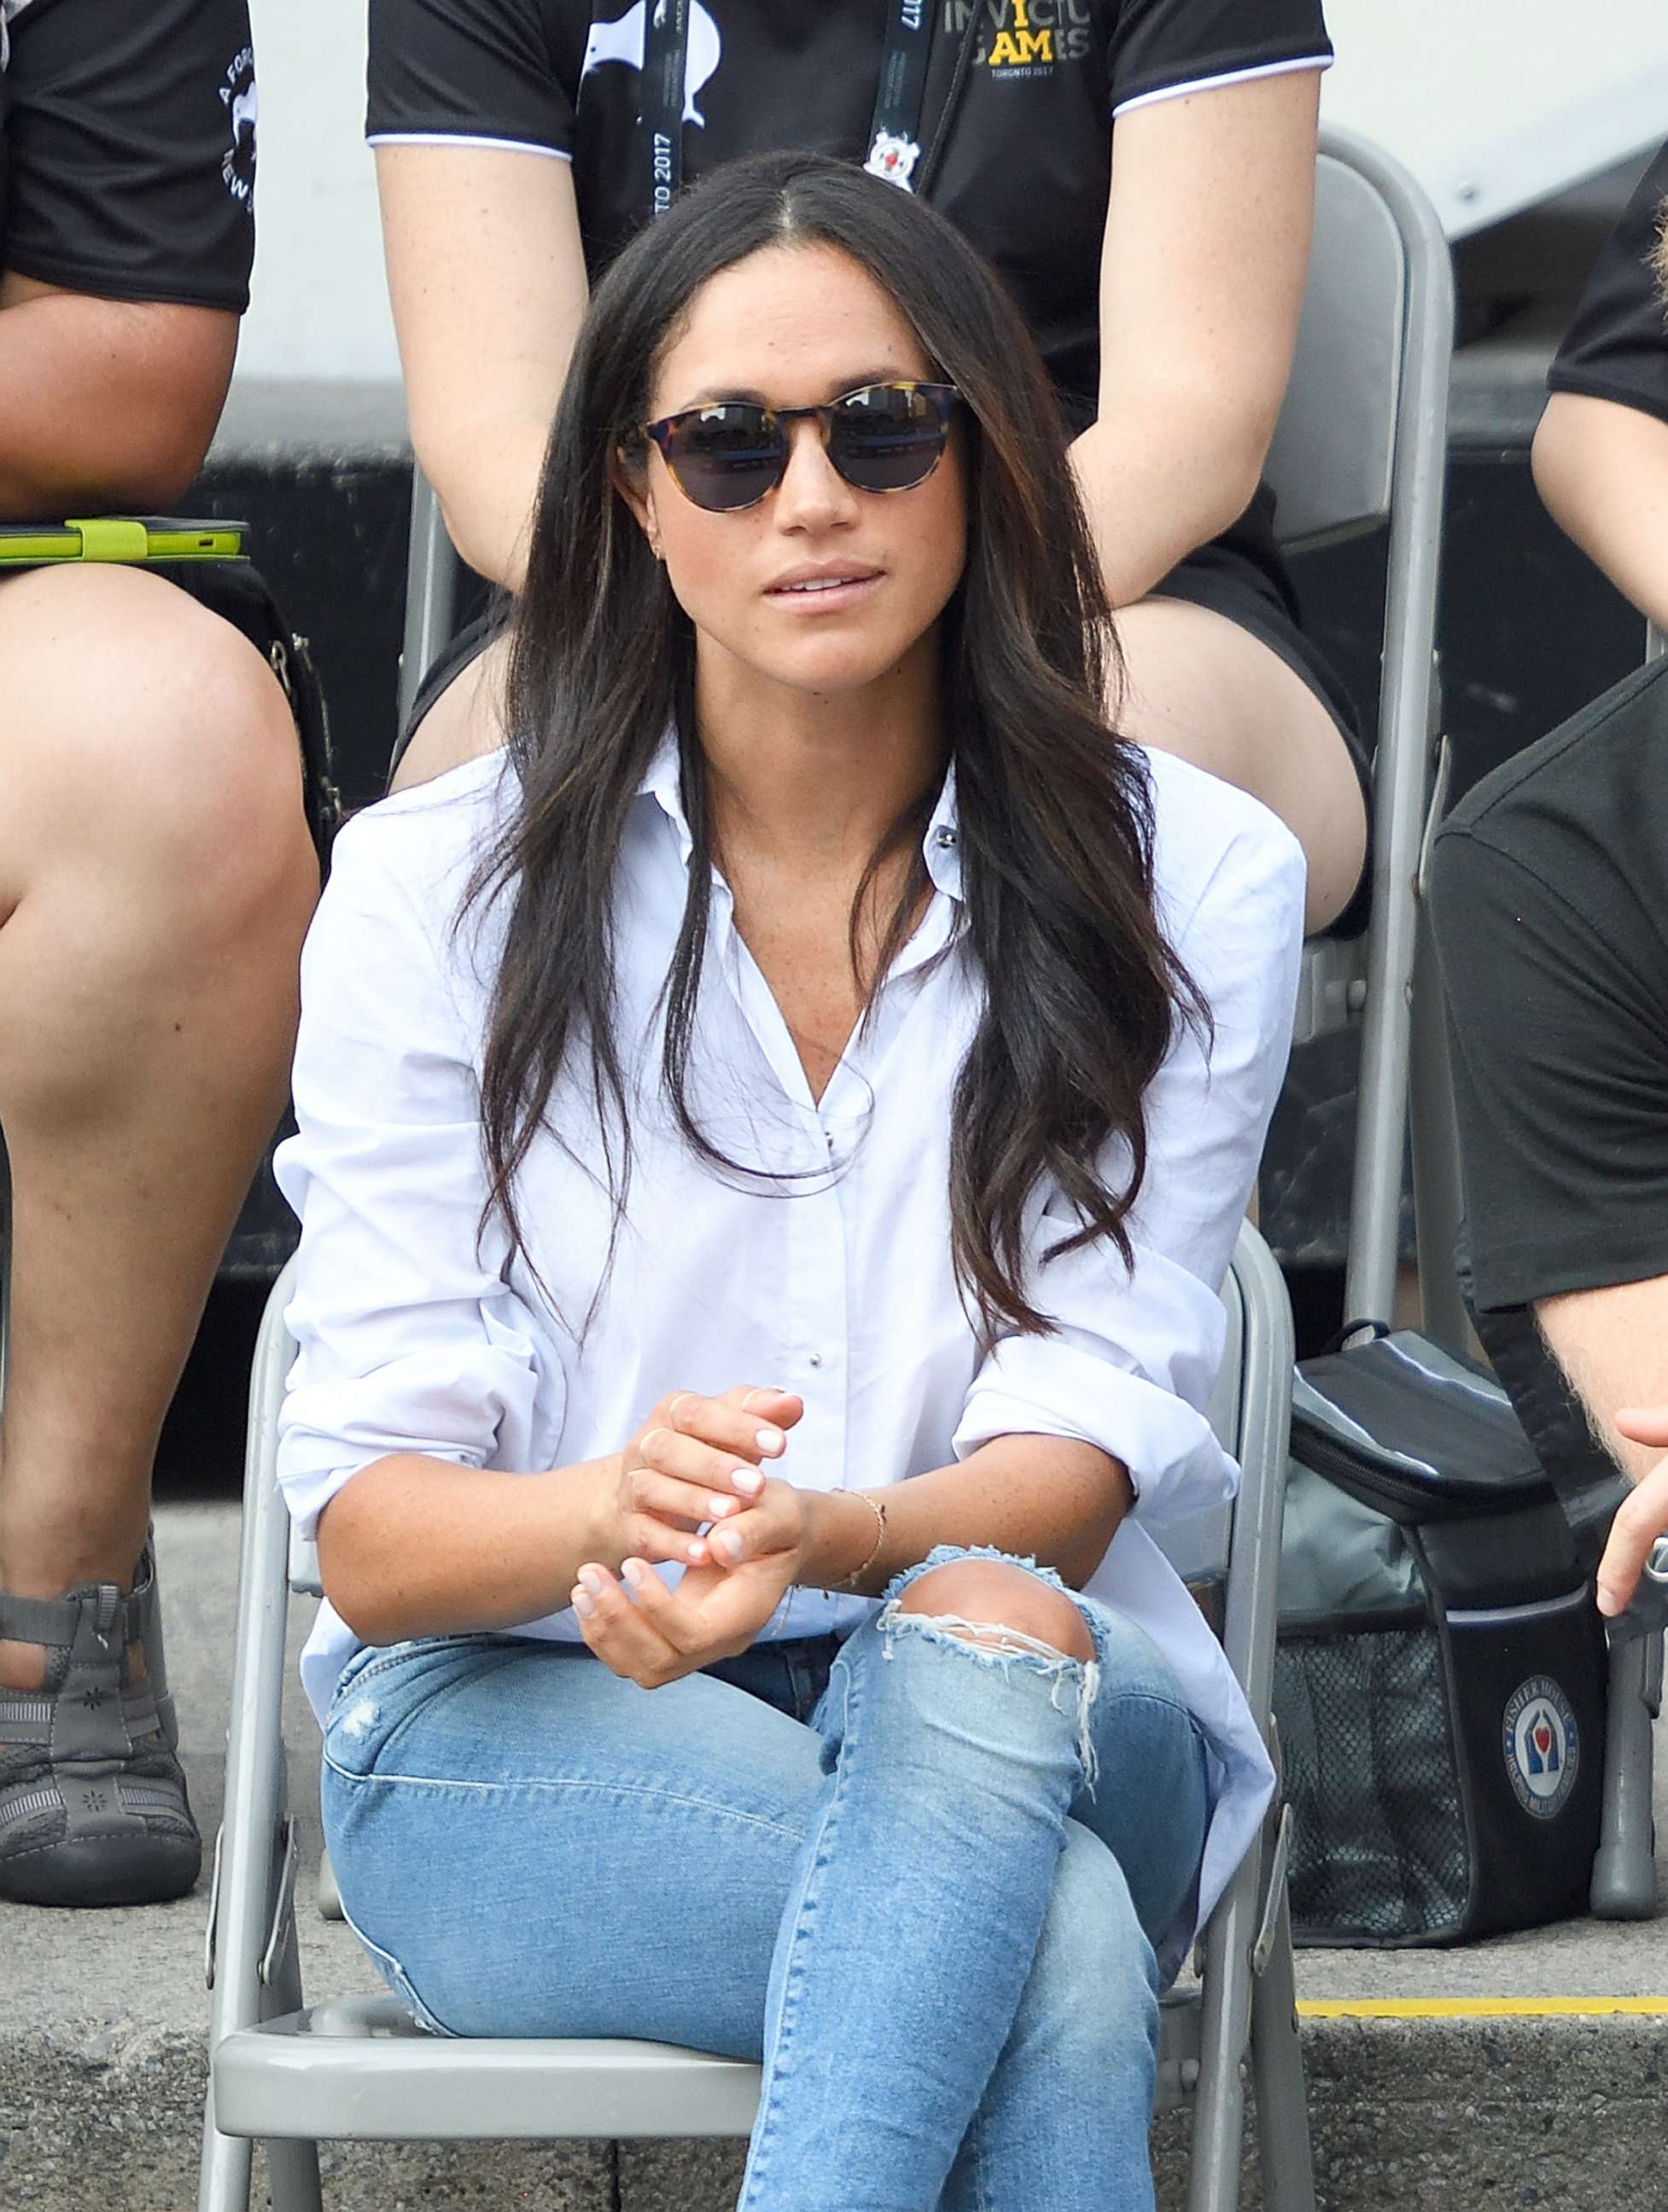 PHOTO: Meghan Markle attends the Wheelchair Tennis on day 3 of the Invictus Games Toronto 2017 at Nathan Philips Square, Sept. 25, 2017, in Toronto, Canada.